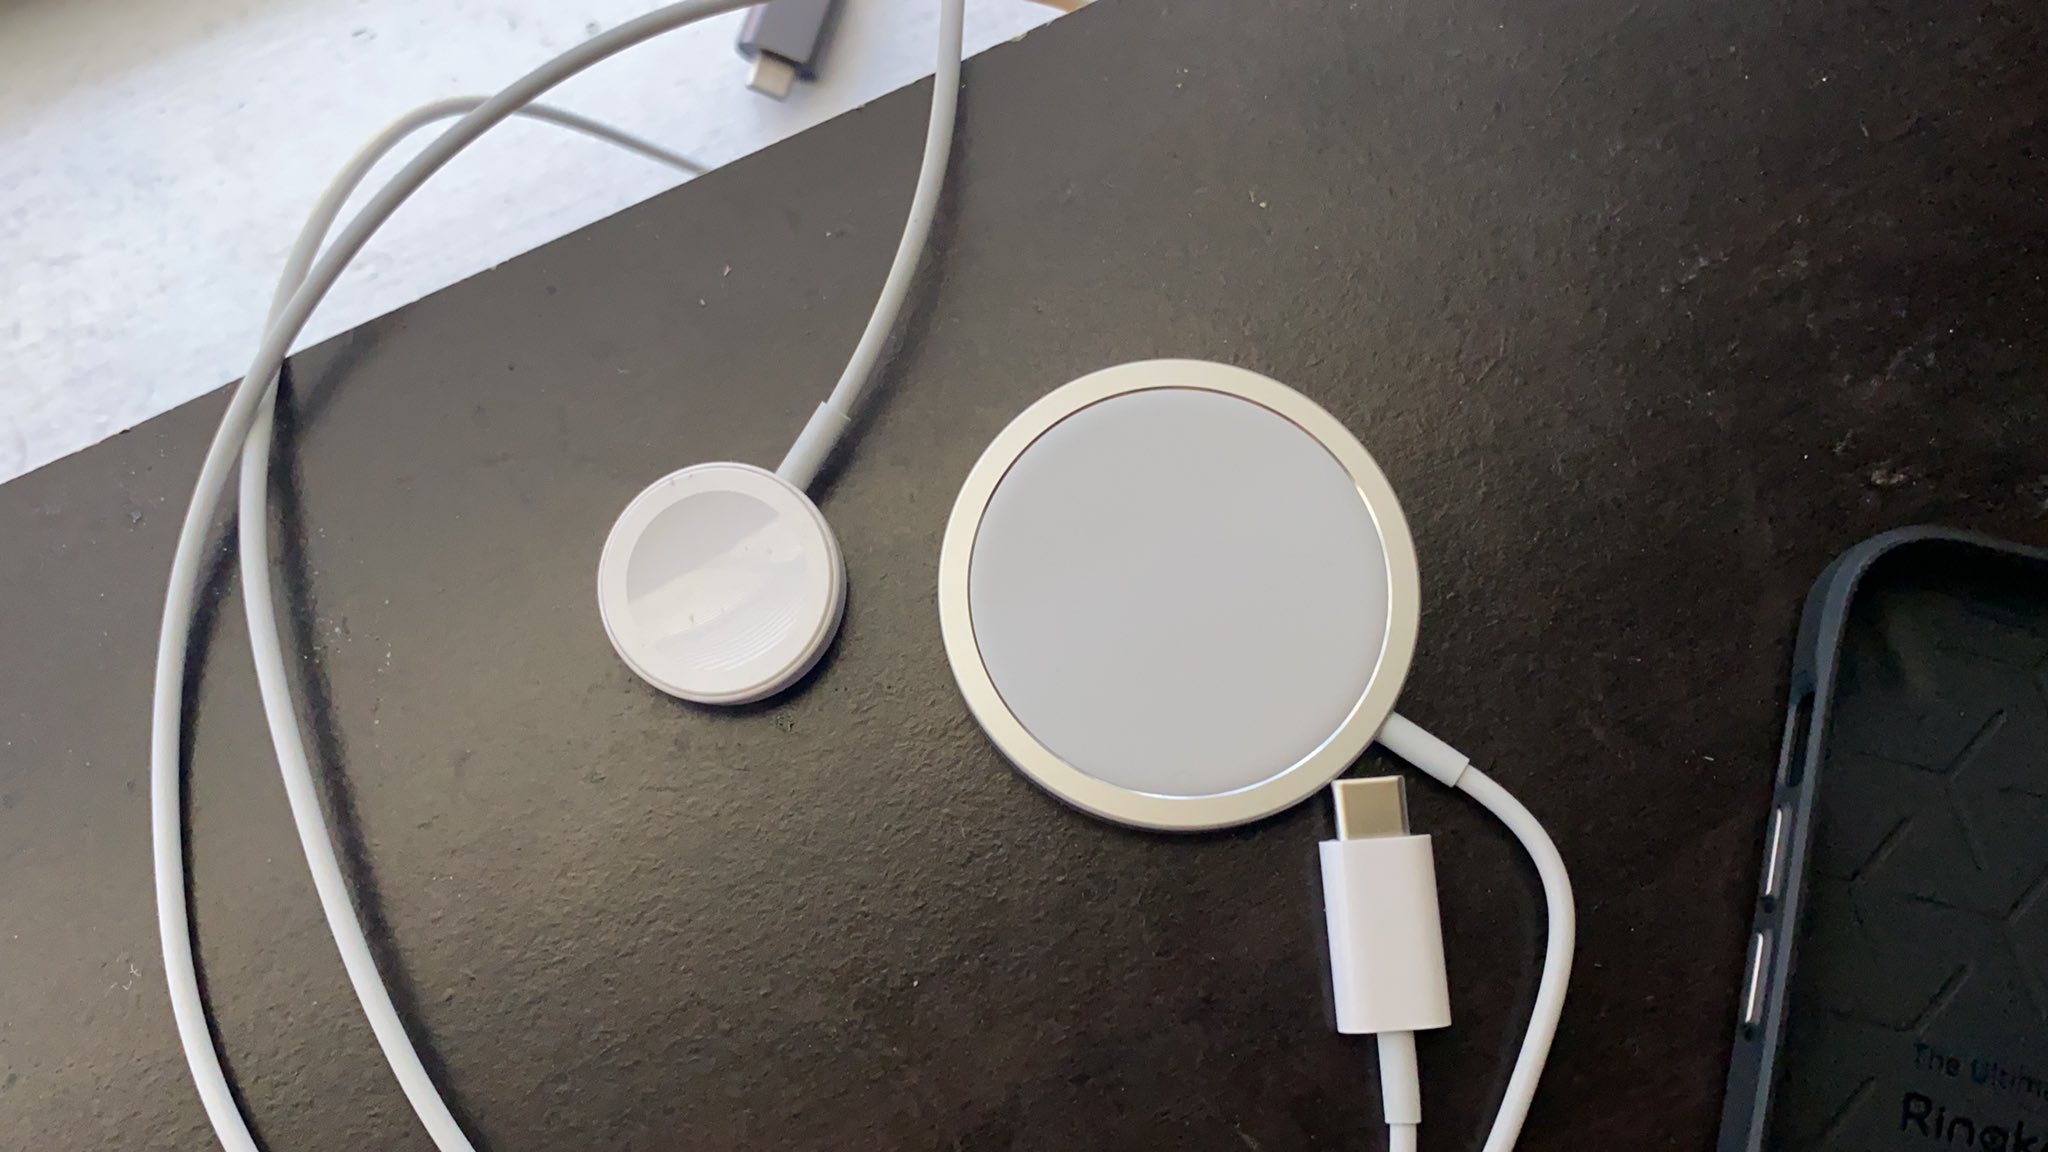 New photos and videos show MagSafe Charger and cases arriving ahead of  iPhone 12 - 9to5Mac